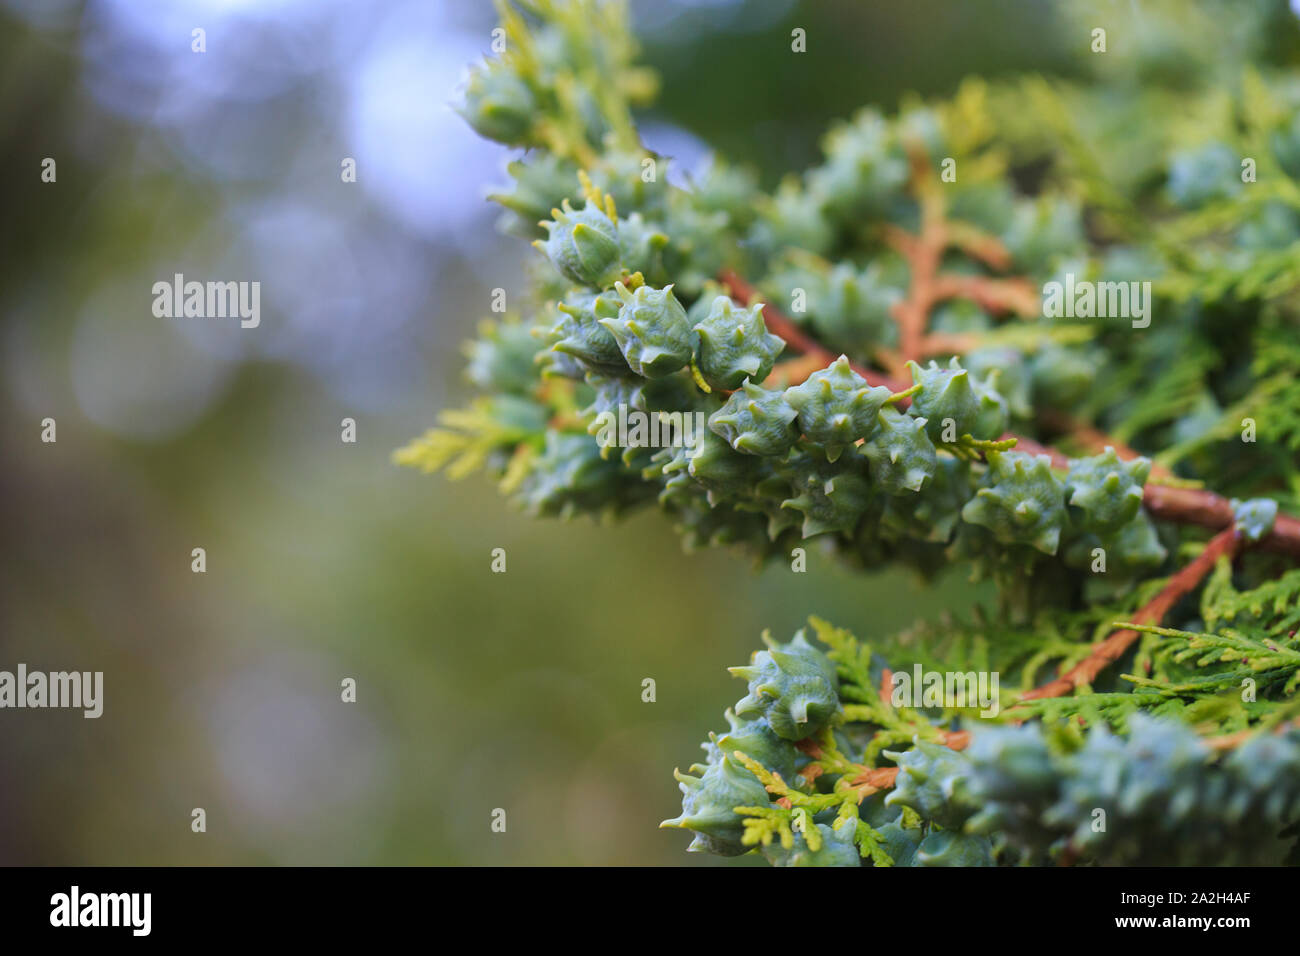 Green cones of thuja western on a branch, close-up. The botanical family of thuja is cupressaceae trees. Stock Photo